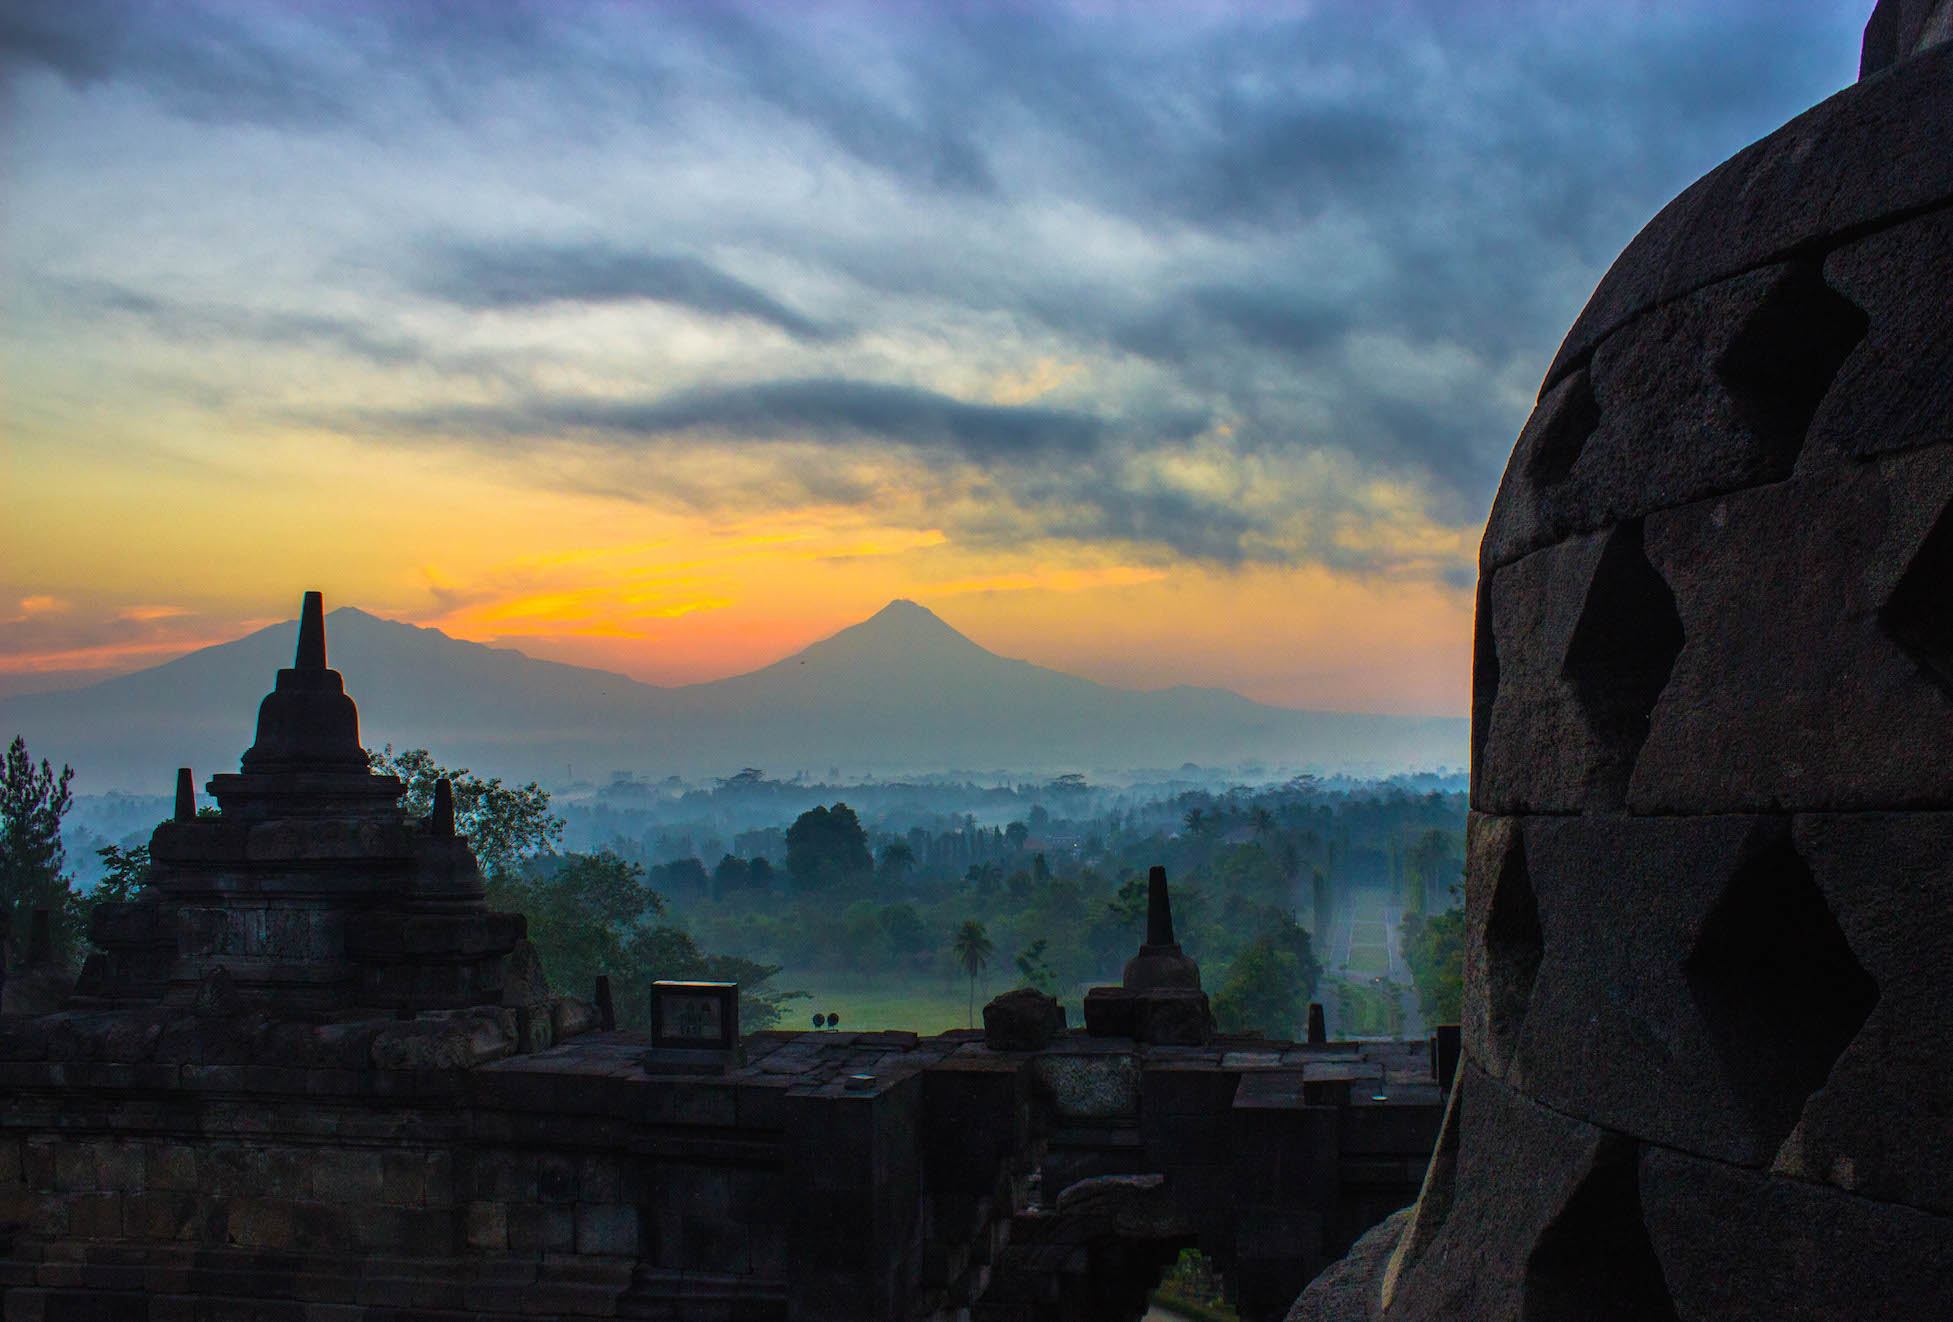 View from the top level of Borobudur, Indonesia